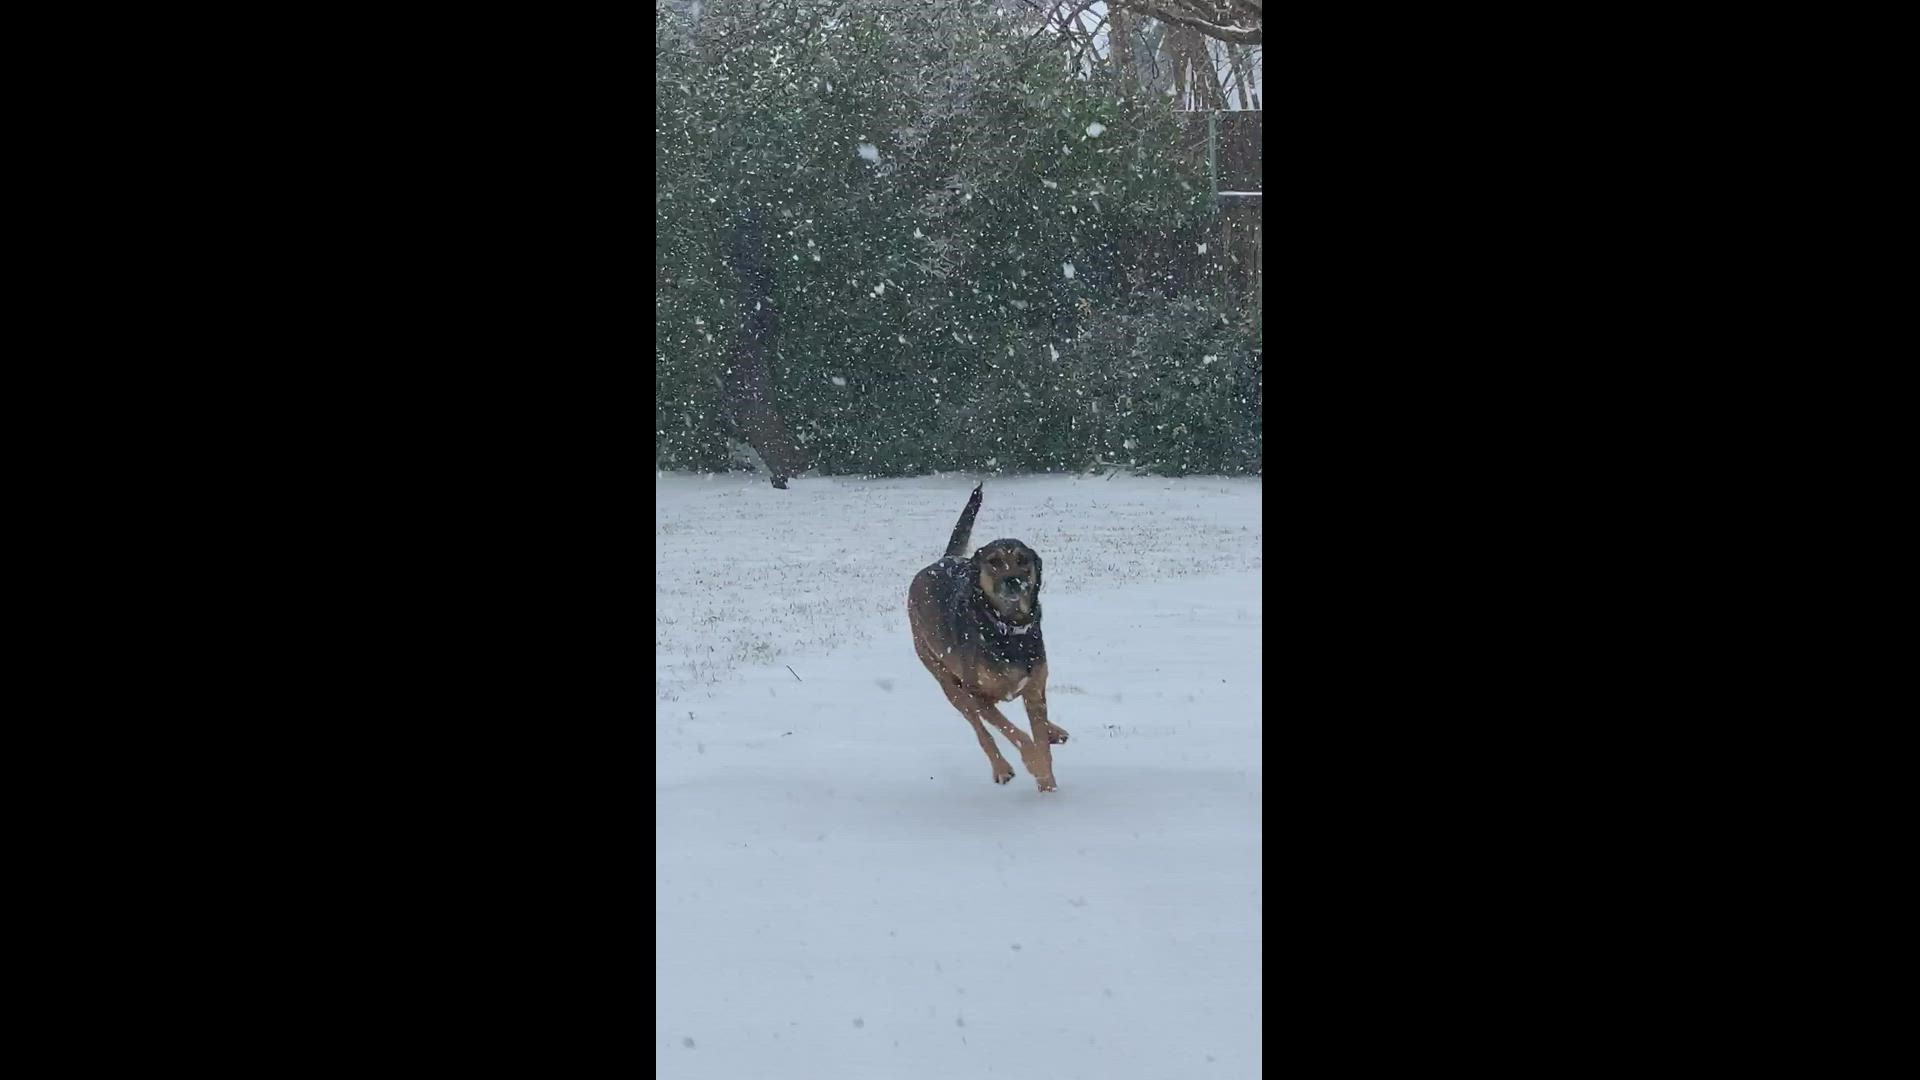 Our pup loves the snow falling in northwest Dallas!
Credit: Mary Westfall